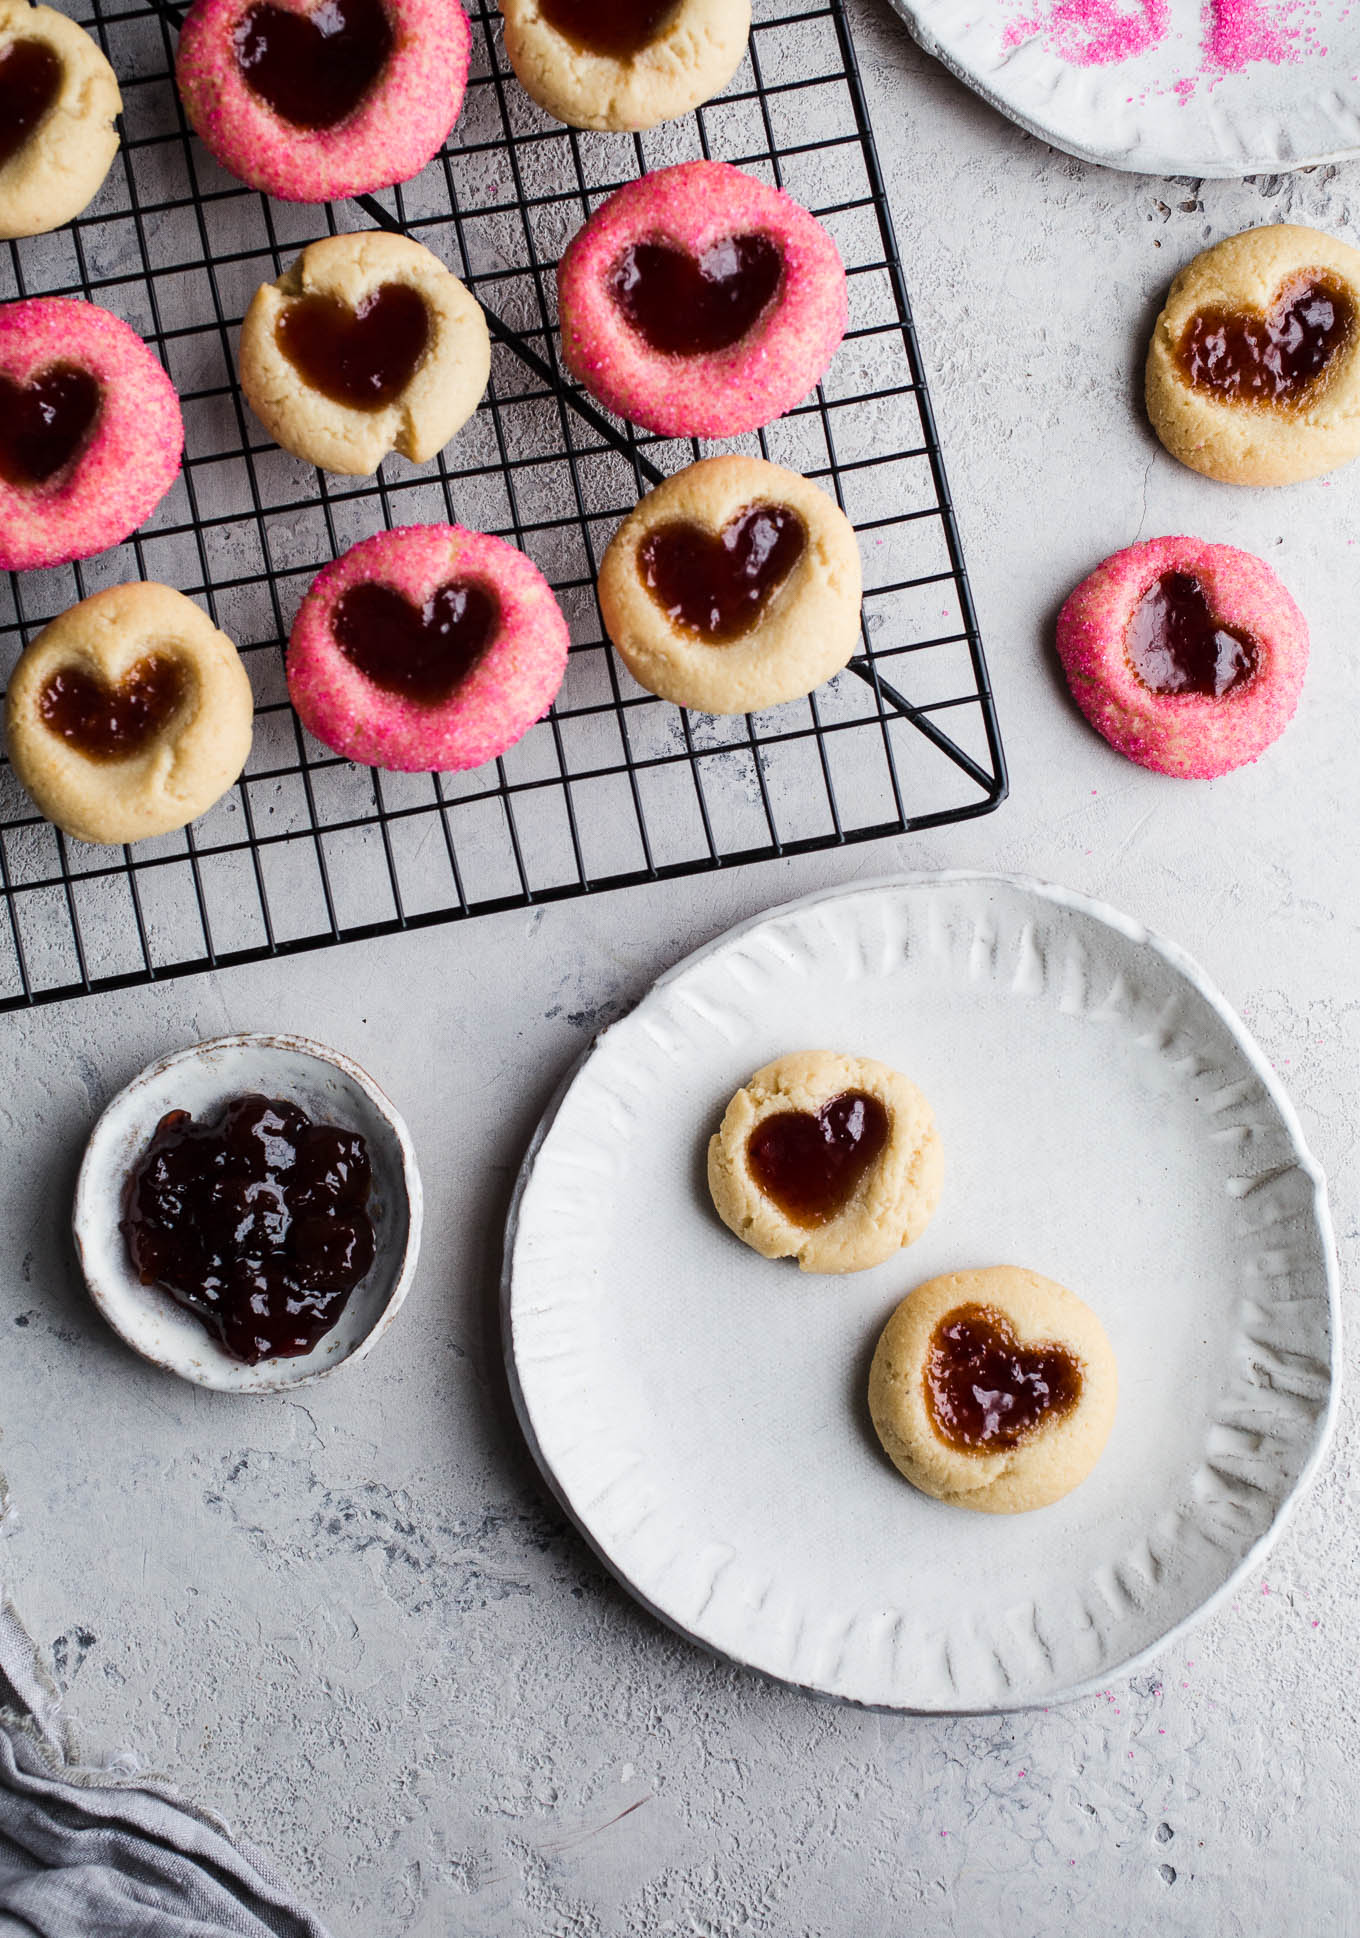 Easy 5-ingredient thumbprint cookies made with almond flour and sweetened with maple syrup, filled with your favorite jam. A gluten-free, vegan thumbprint cookie recipe!